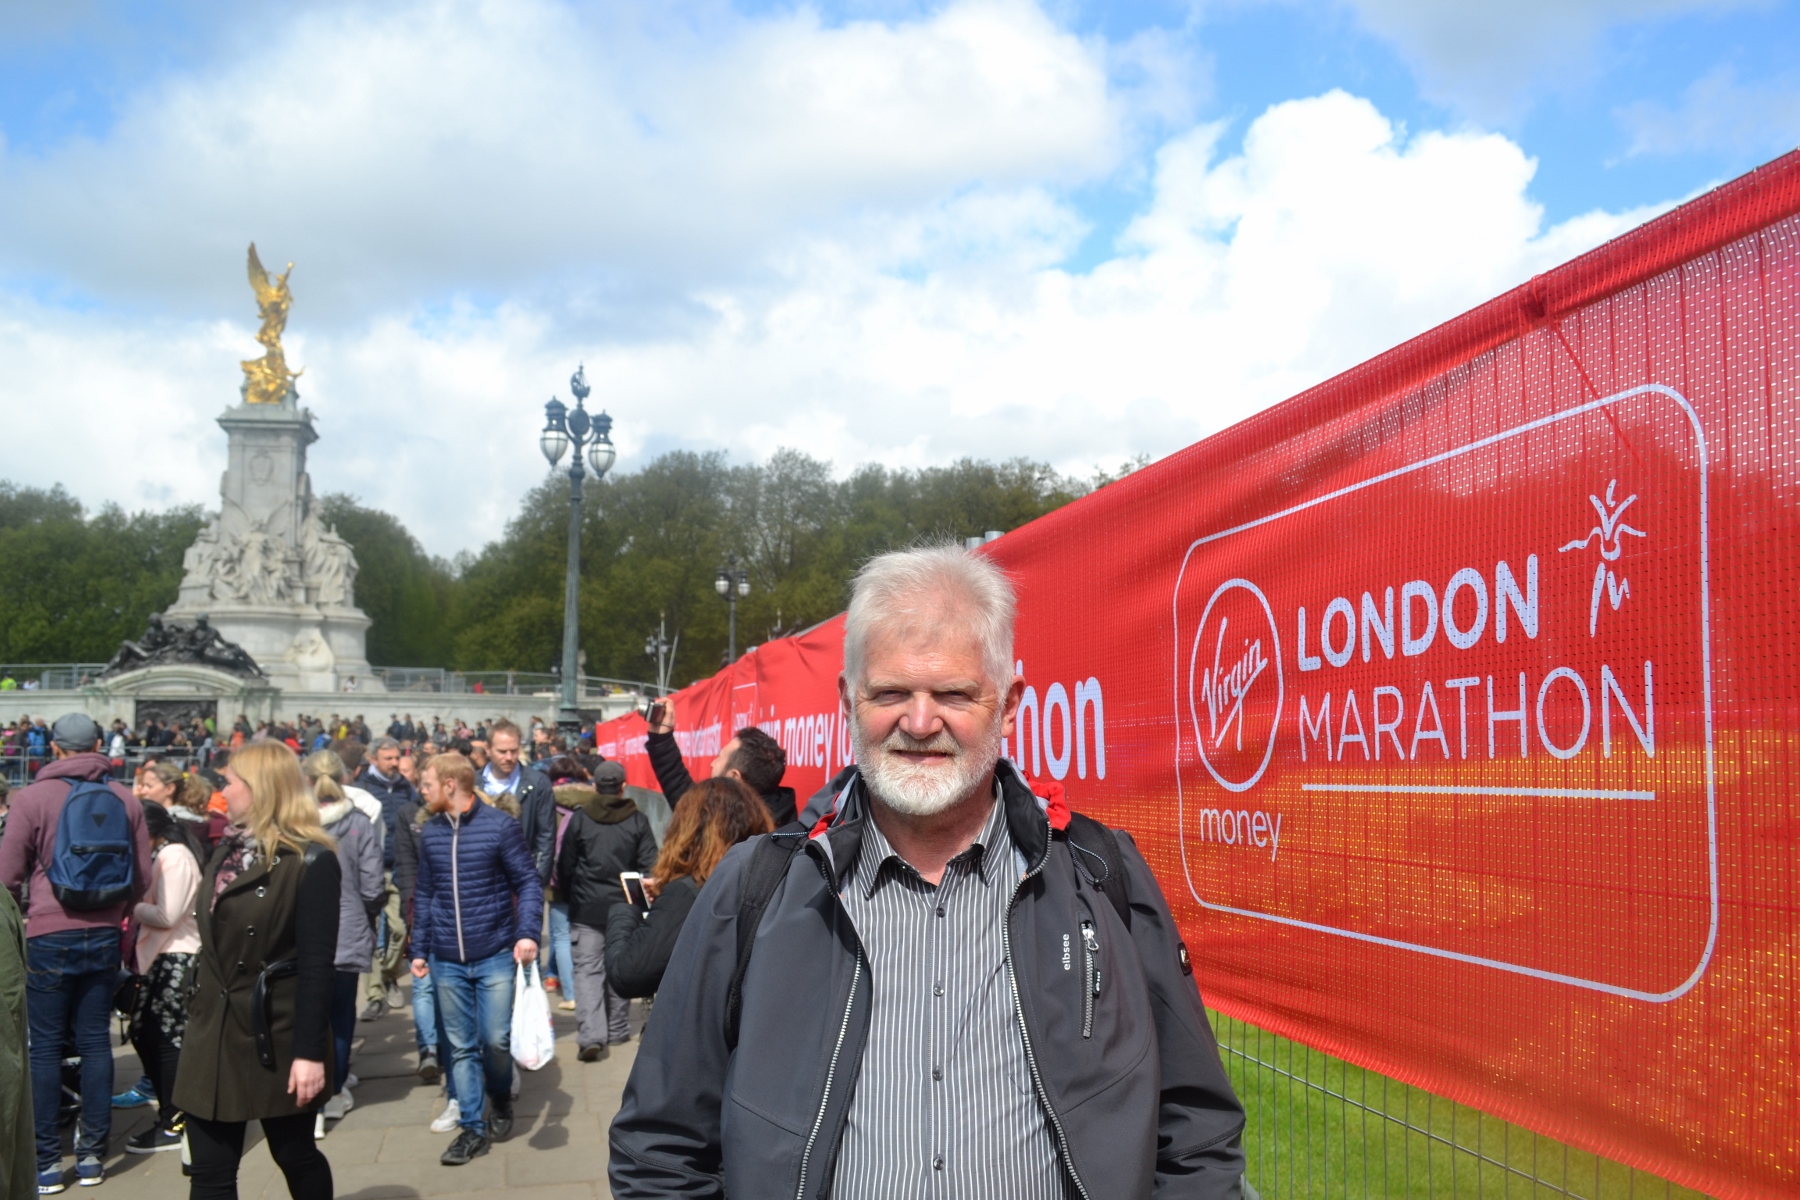 Greetings from the preparations for the London Marathon